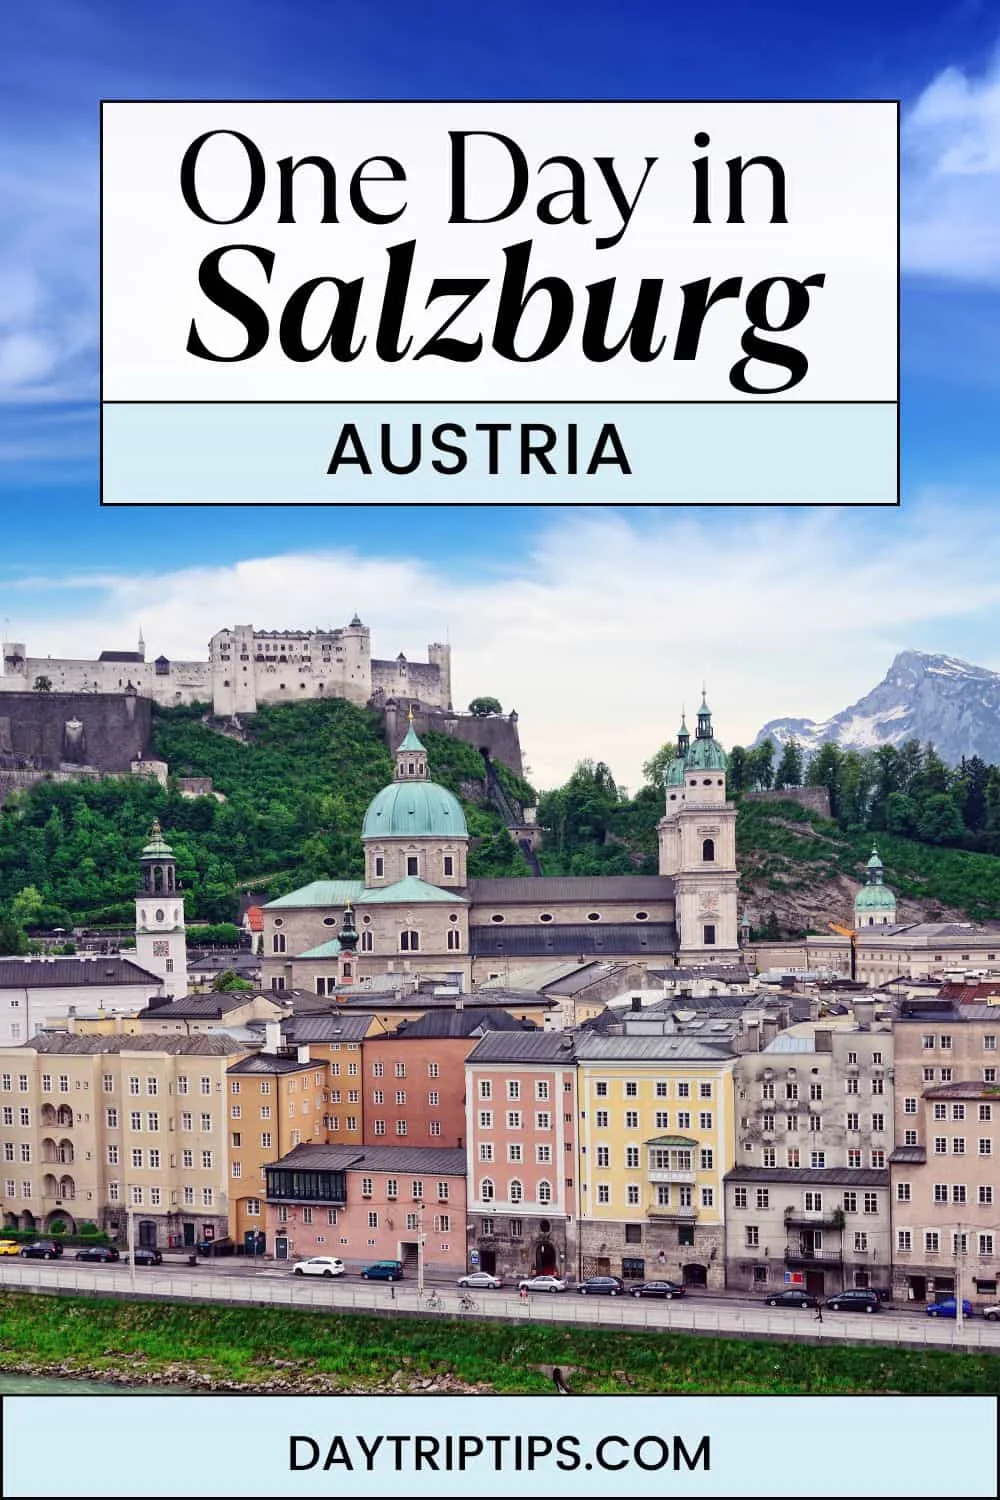 How to Spend One Day in Salzburg (Itinerary)